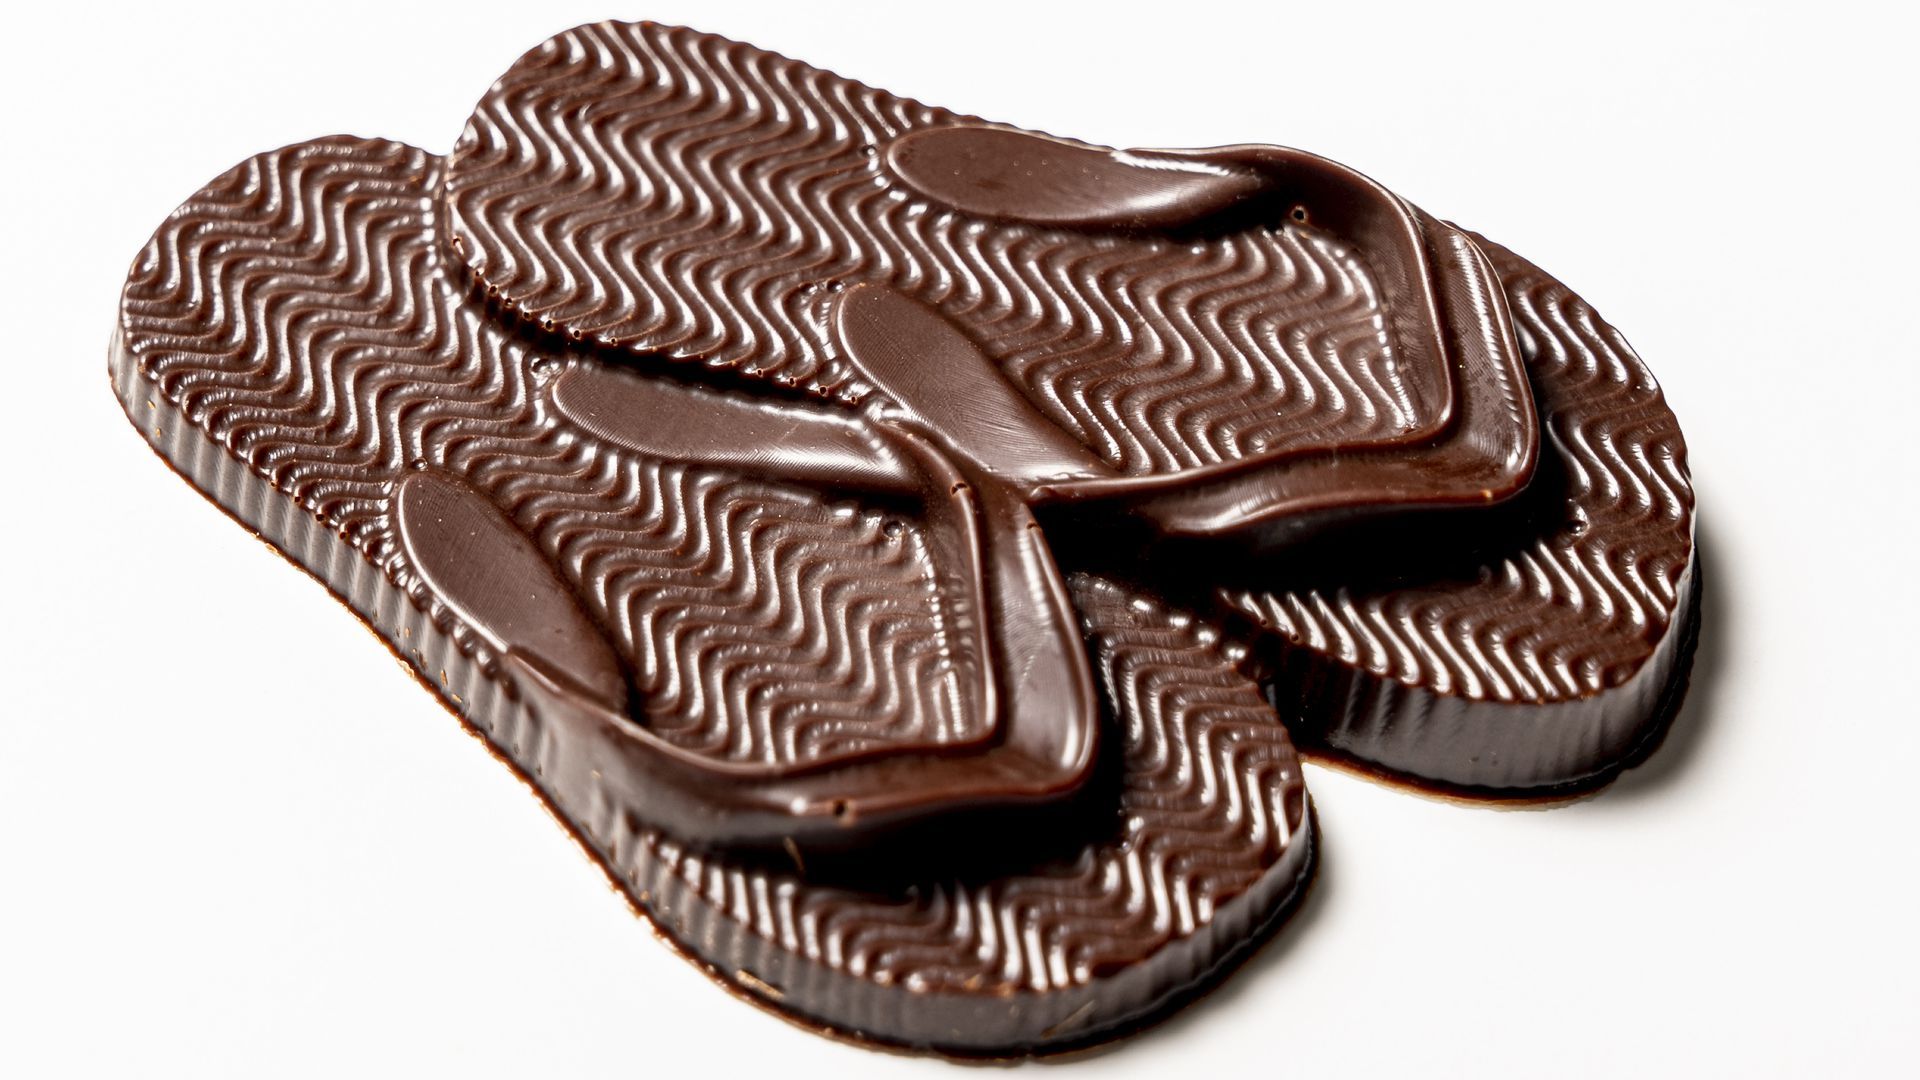 Flip flops made out of chocolate